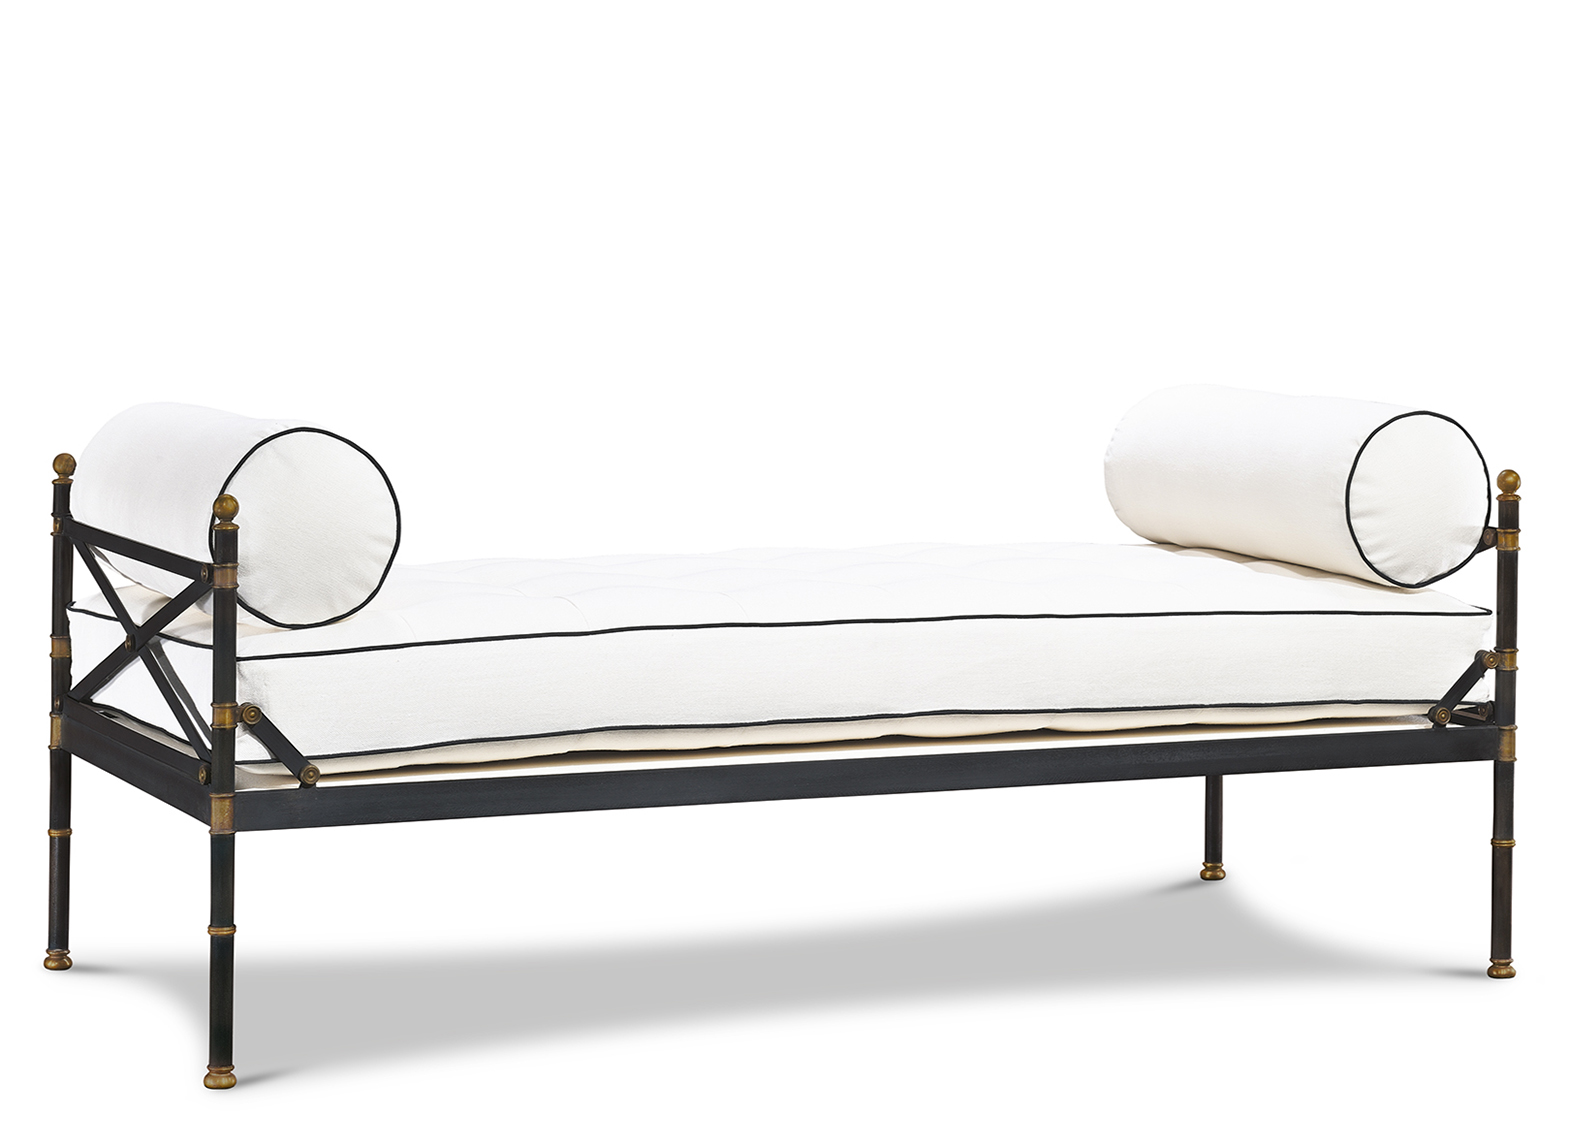 BENCHES & CHAISE LONGUES